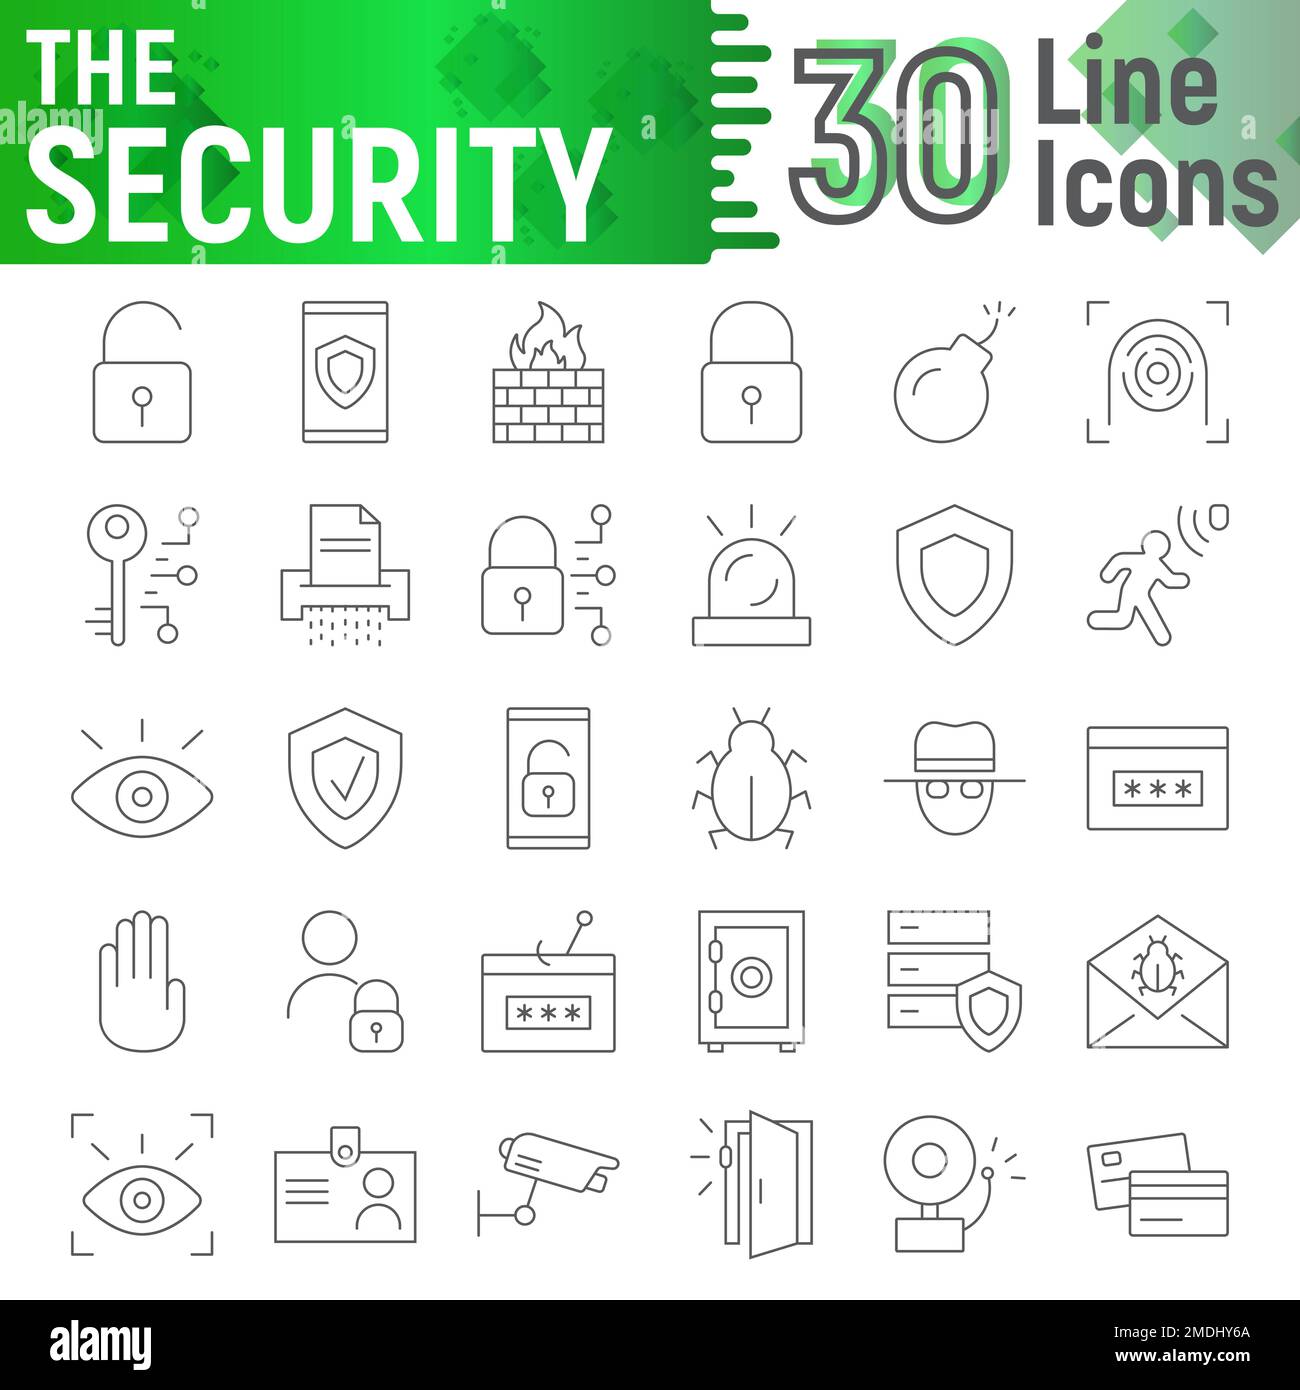 Security thin line icon set, protection symbols collection, vector sketches, logo illustrations, defense signs linear pictograms package isolated on white background, eps 10. Stock Vector